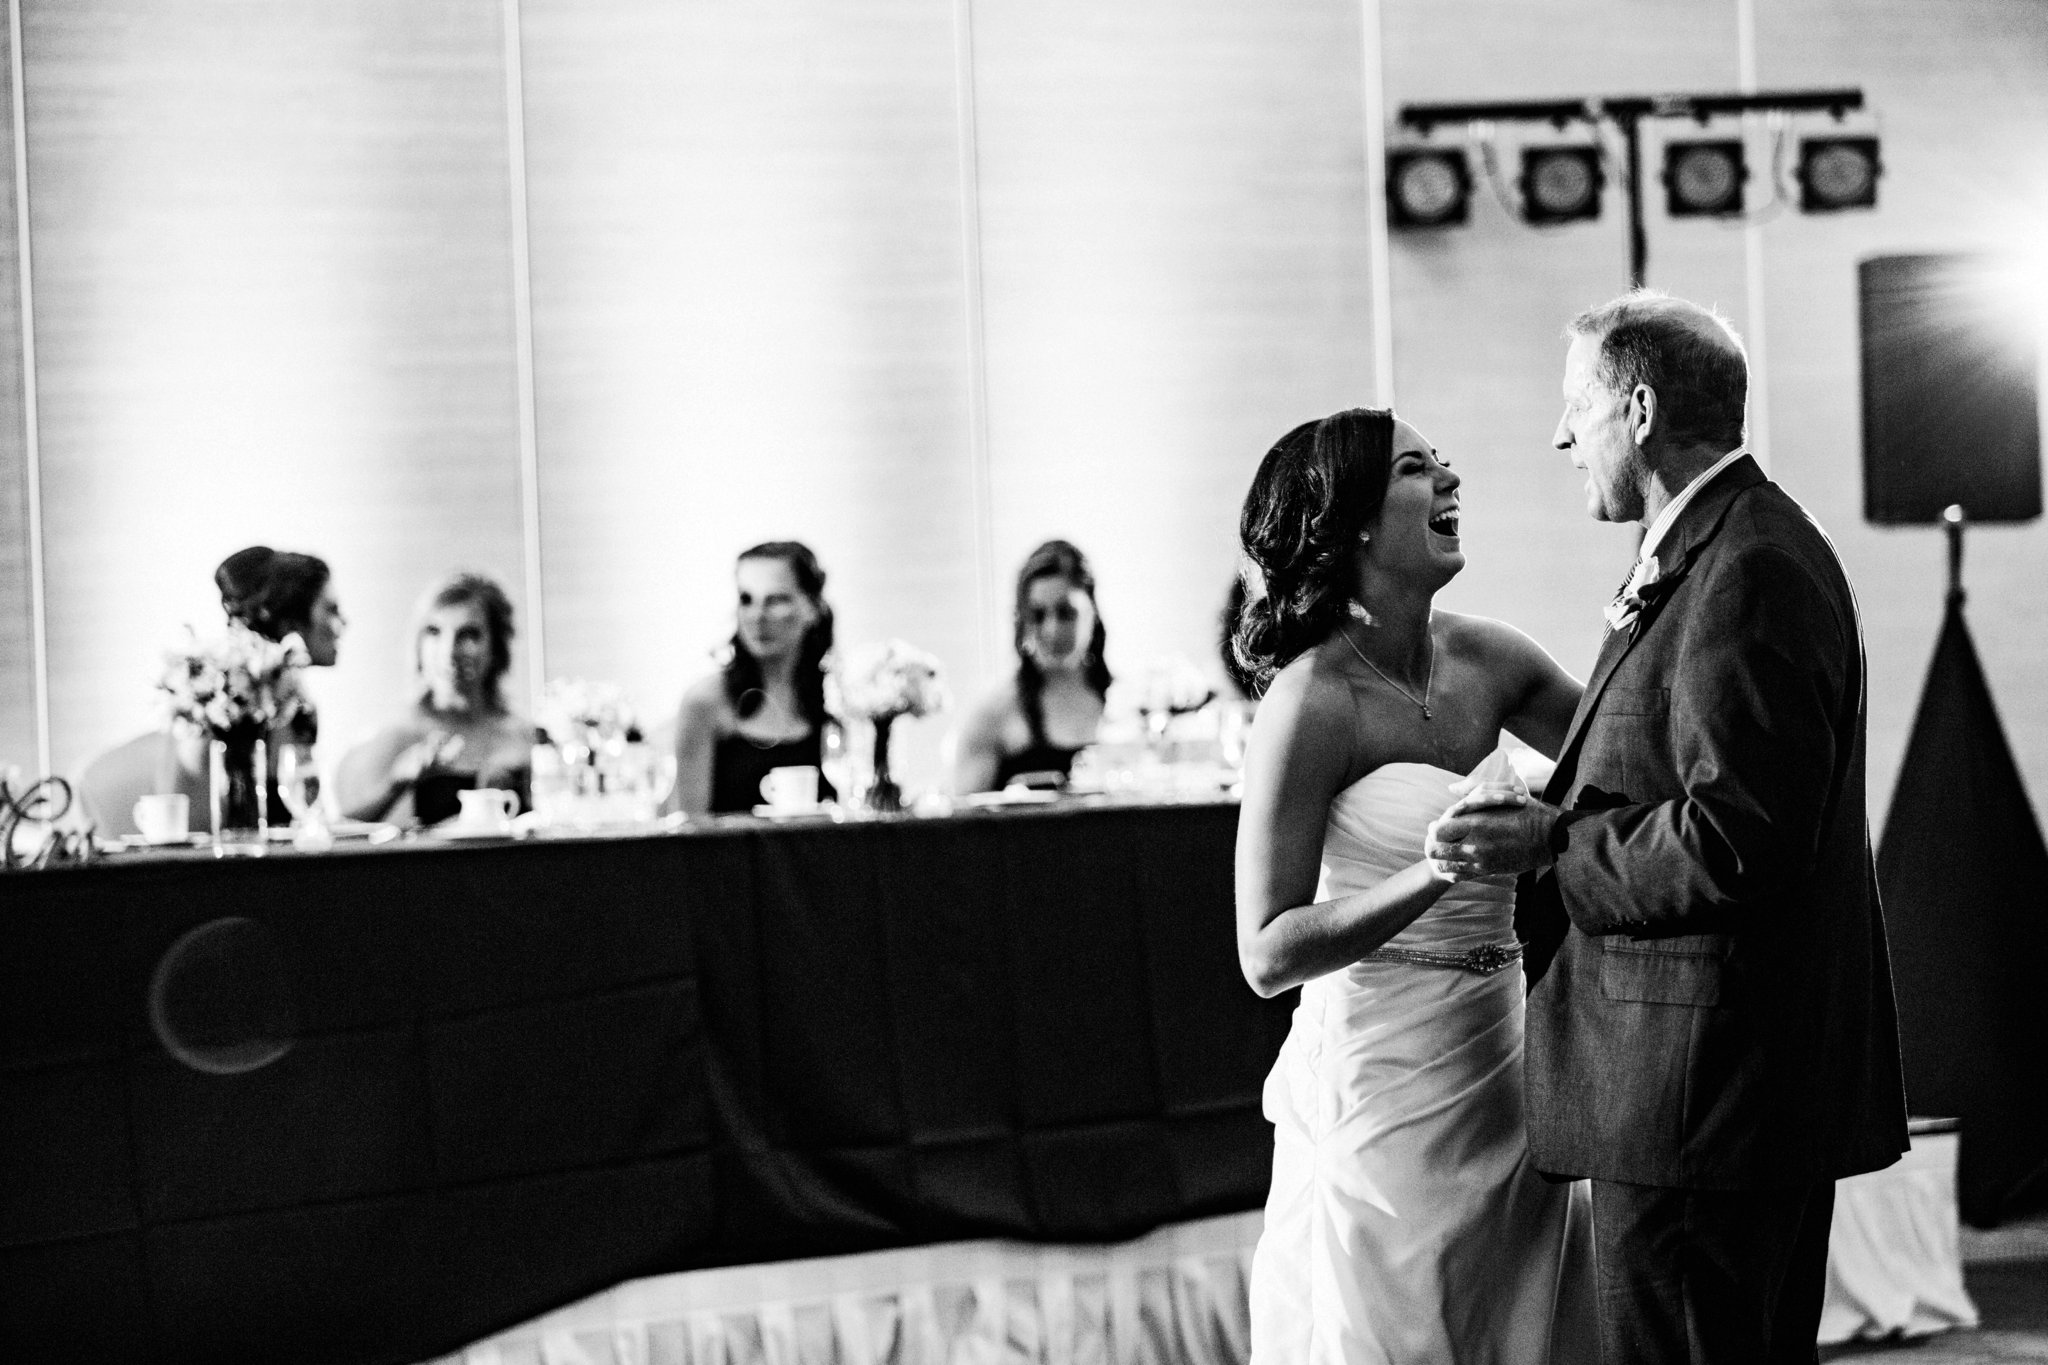 black and white | wedding | wedding photos | wedding photography | images by feliciathephotographer.com | Country Club Plaza | Kansas City | The Marriott | Unity Temple | reception venue | first dance | candid | laughing bride 